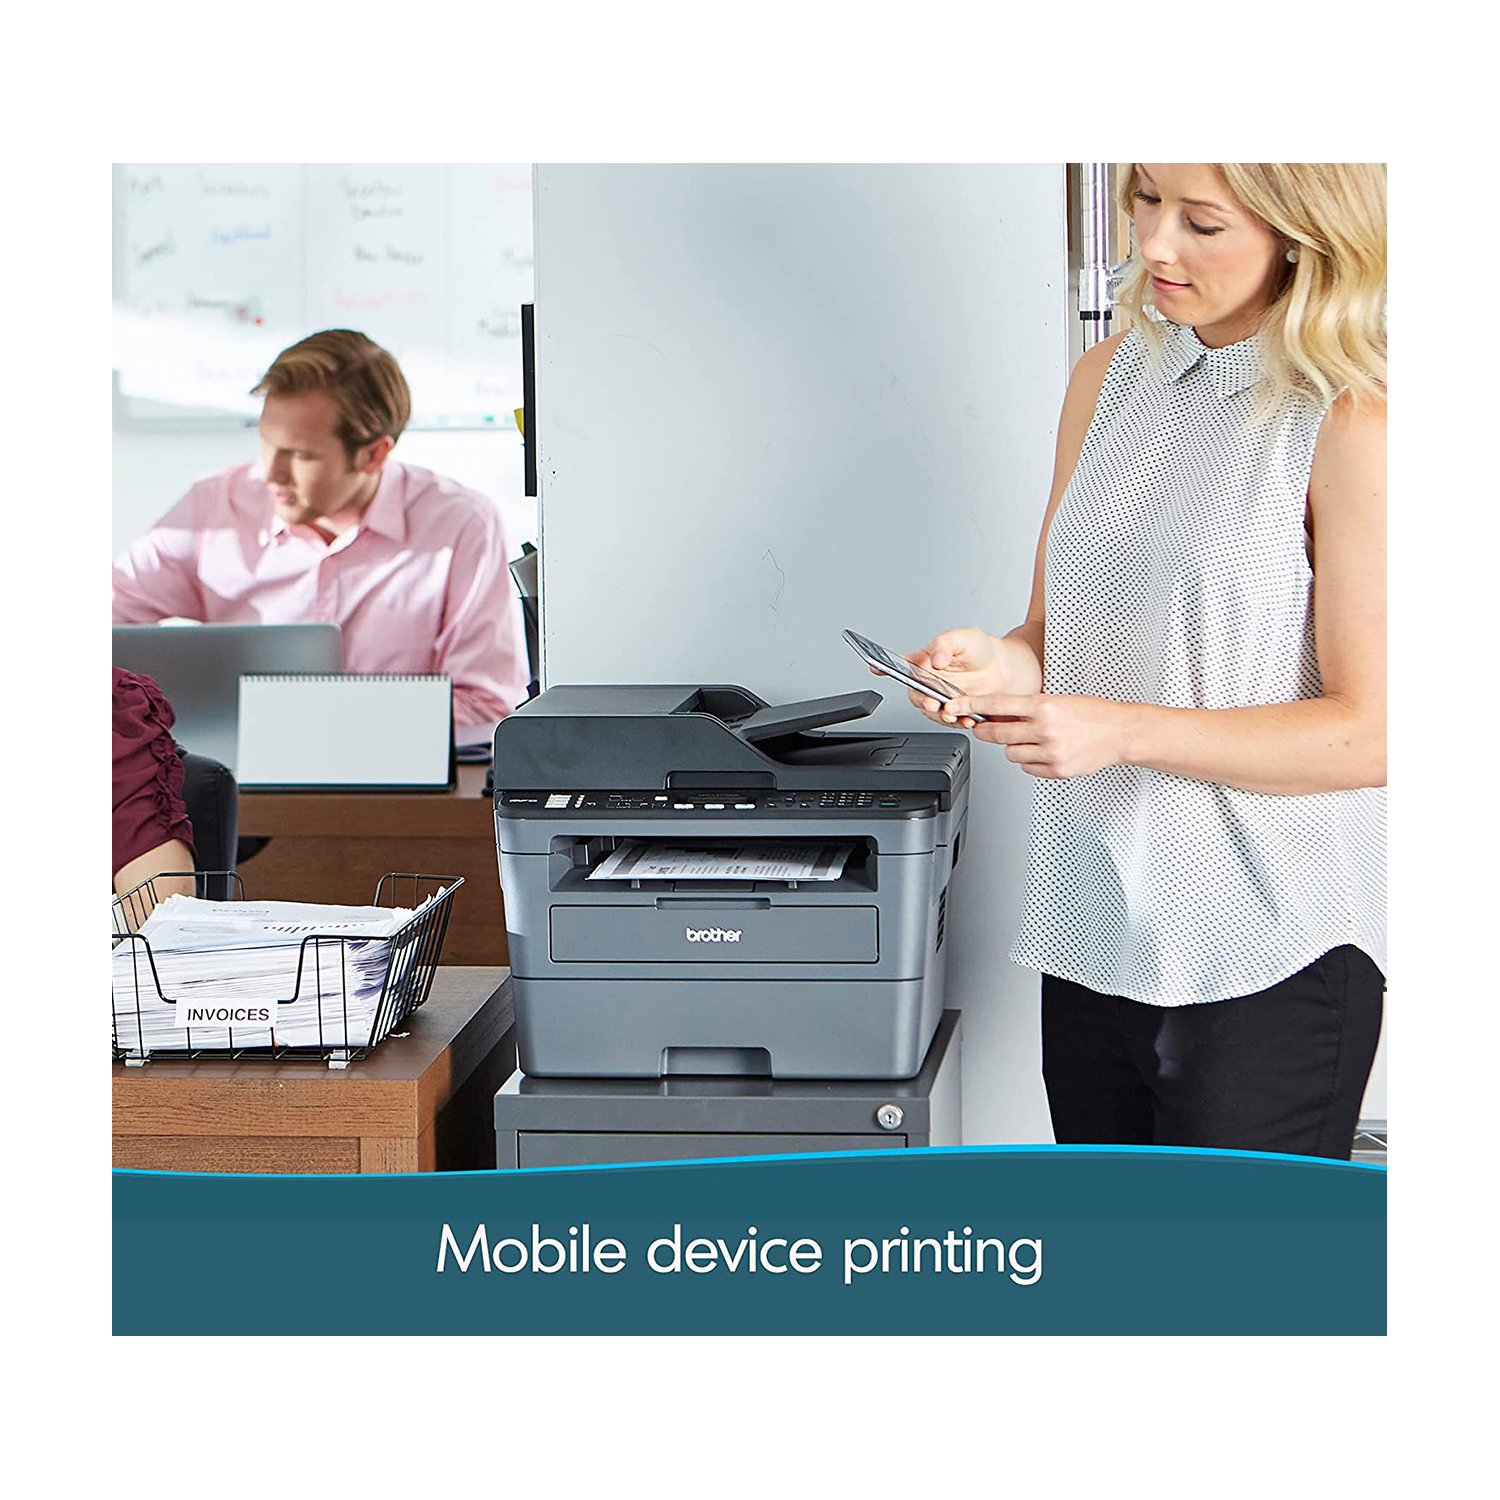 Brother MFC-L2710DW All in 1 Wireless Printer